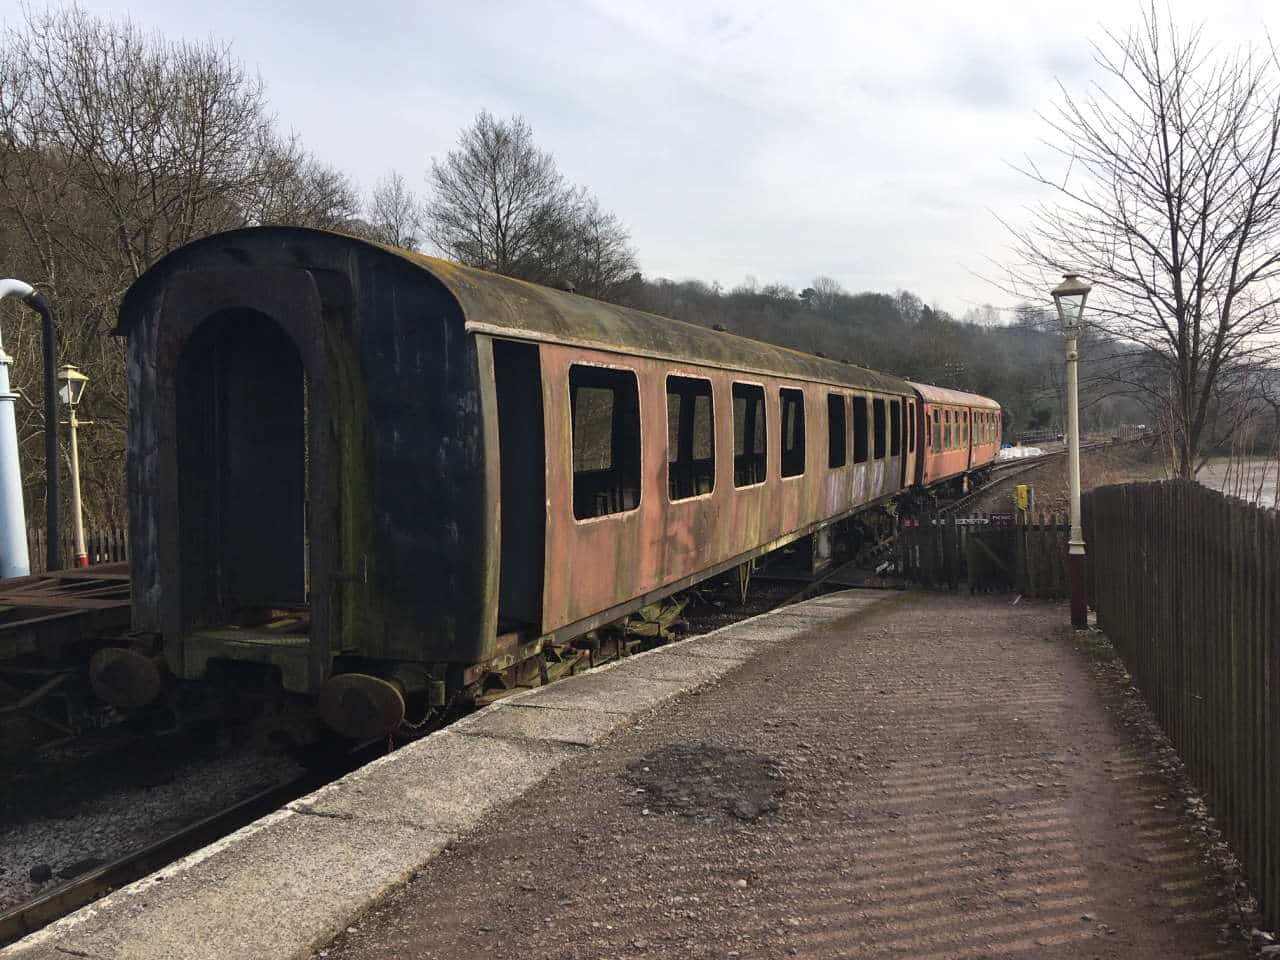 Churnet Valley BR Mk1 Carriages